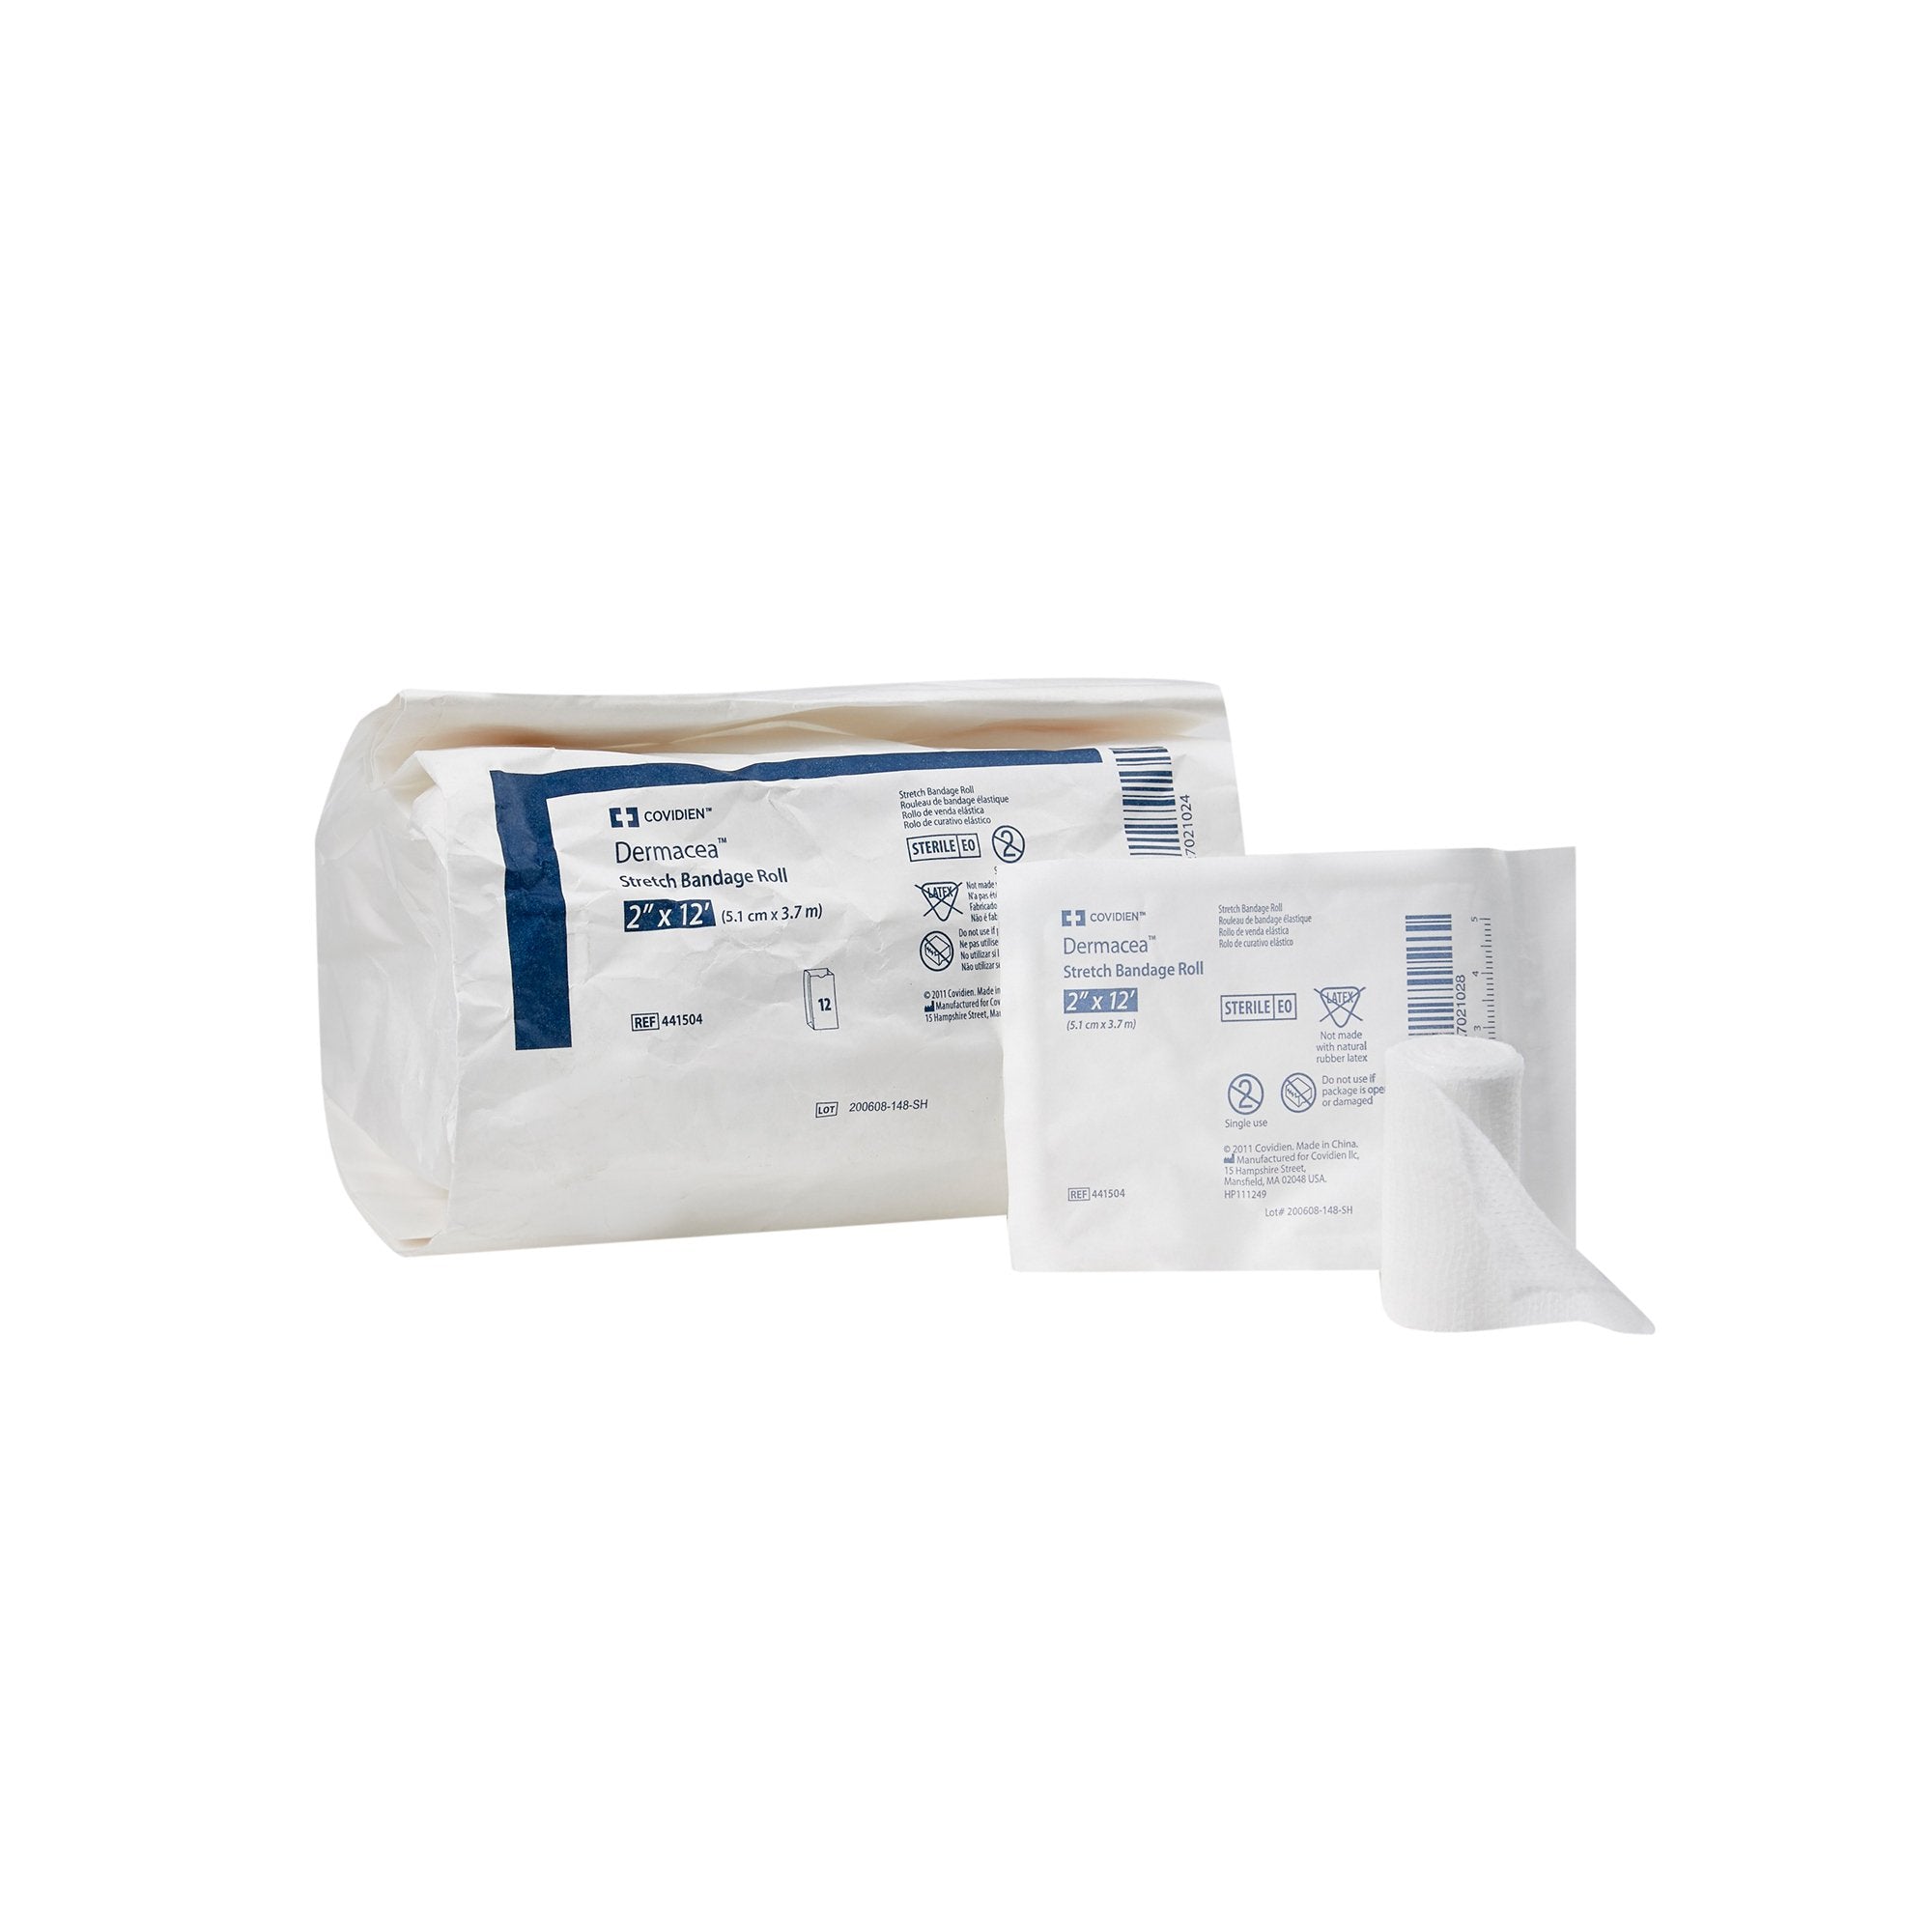 Dermacea™ Conforming Bandage Cotton / Polyester (2 in x 4 yd) Sterile